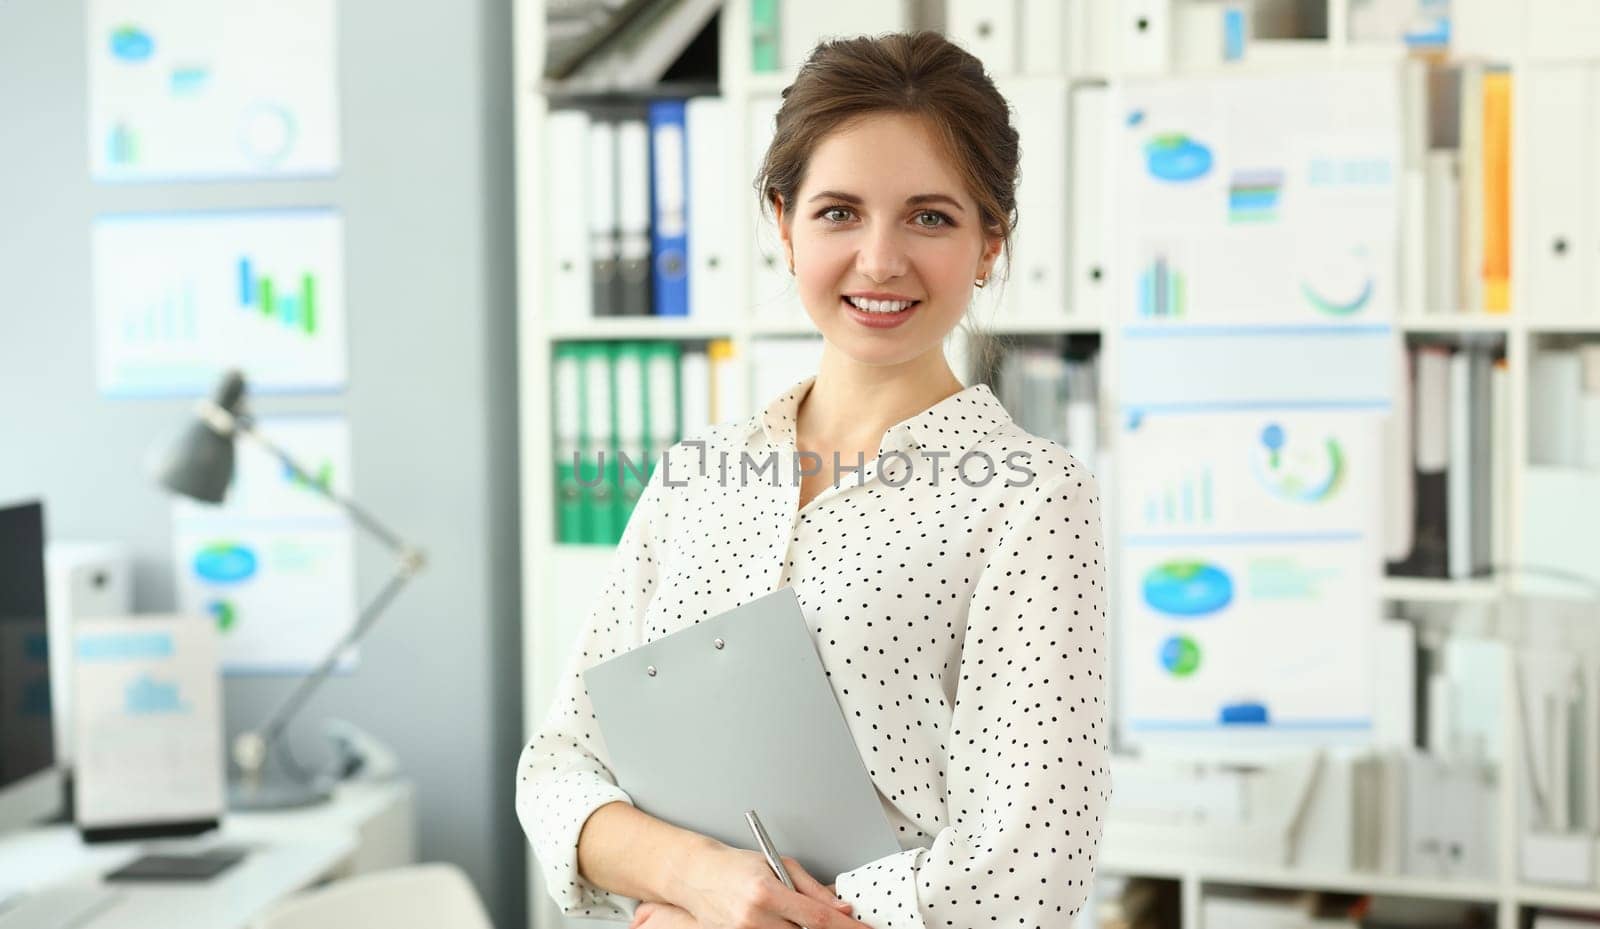 Beautiful smiling woman standing in office holding document clipped to pad looking in camera headshot